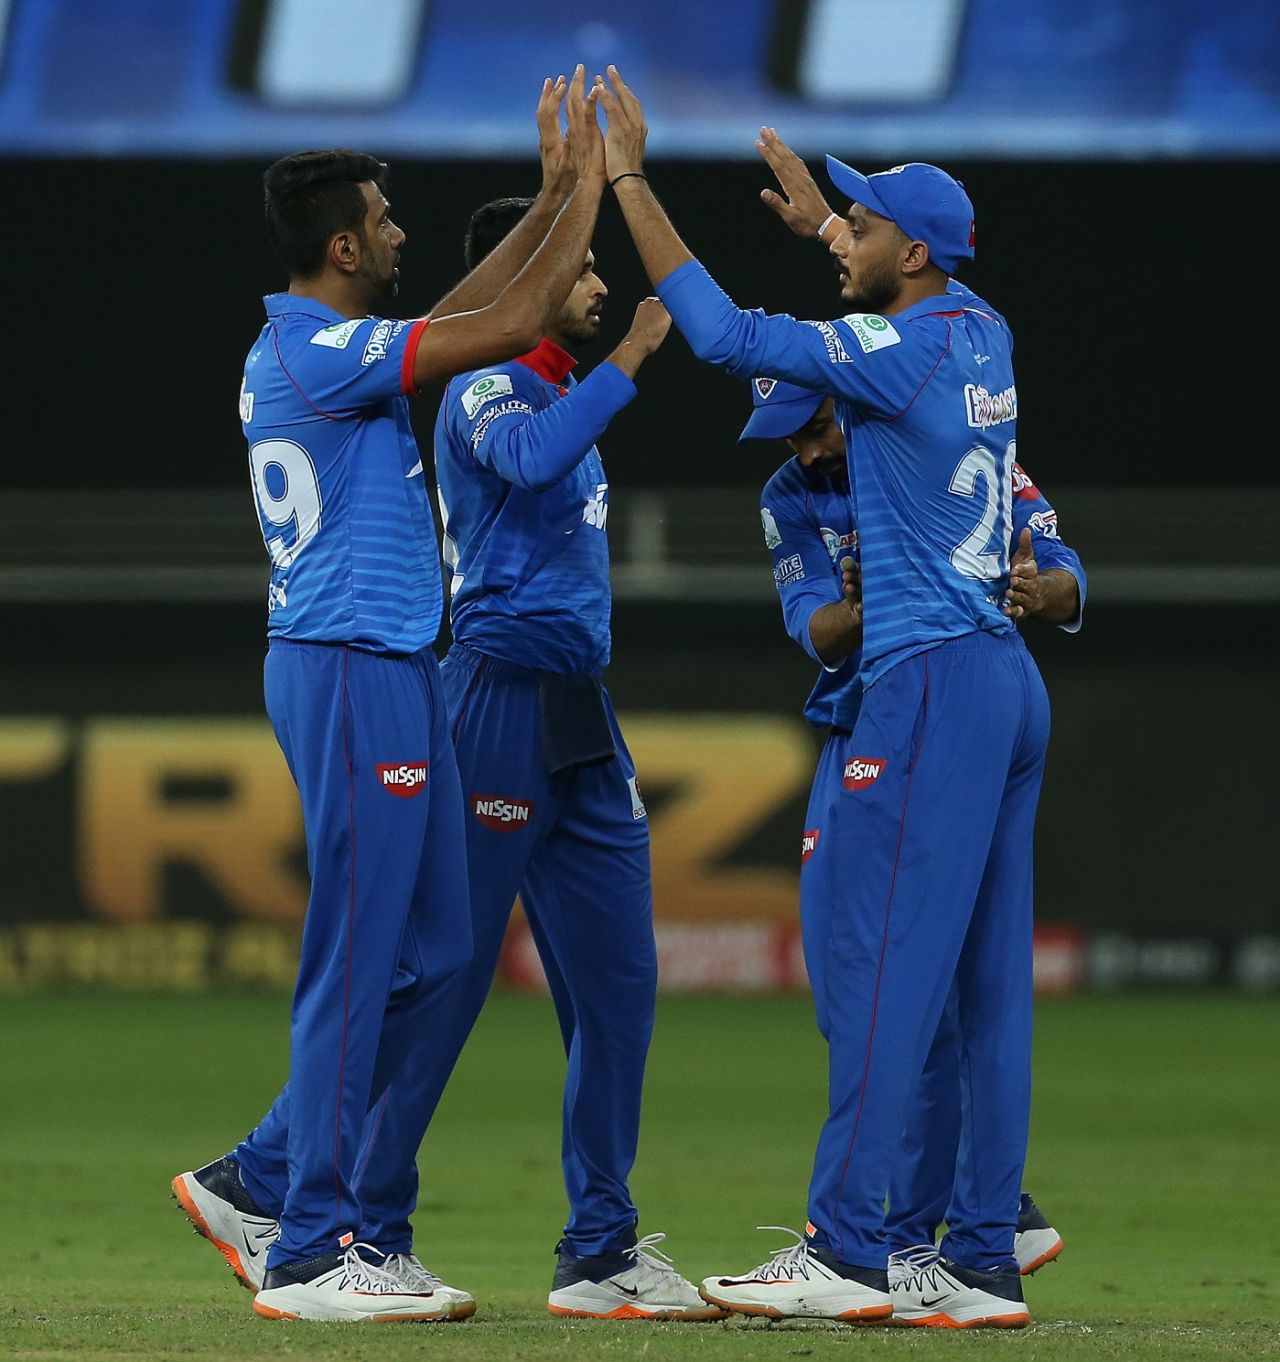 R Ashwin ended the first-wicket stand at 107, Sunrisers Hyderabad vs Delhi Capitals, IPL 2020, Dubai, October 27, 2020